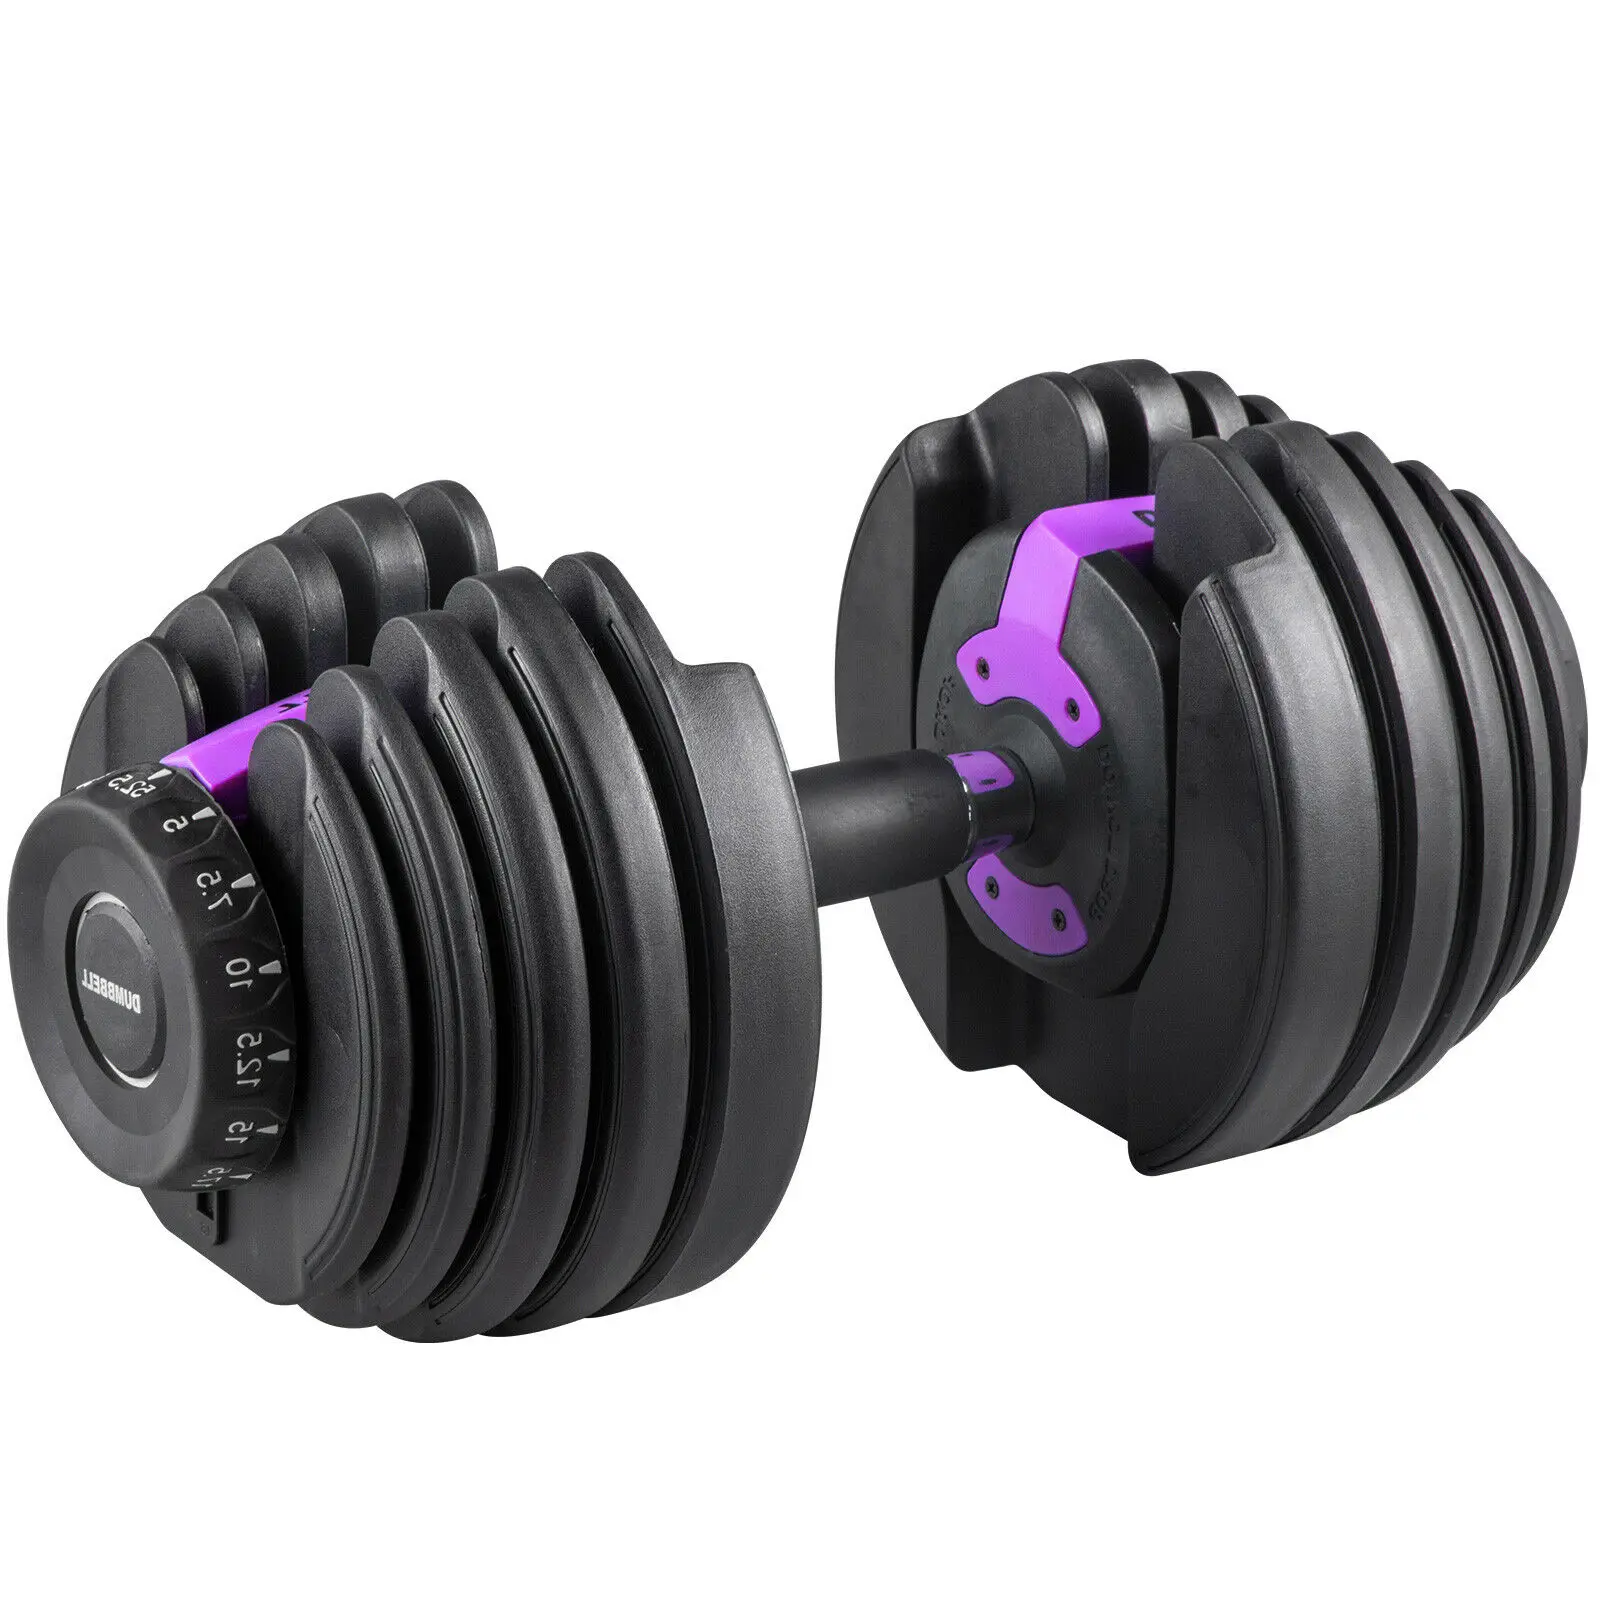 Fitness Workout Gym Equipment Fitness 